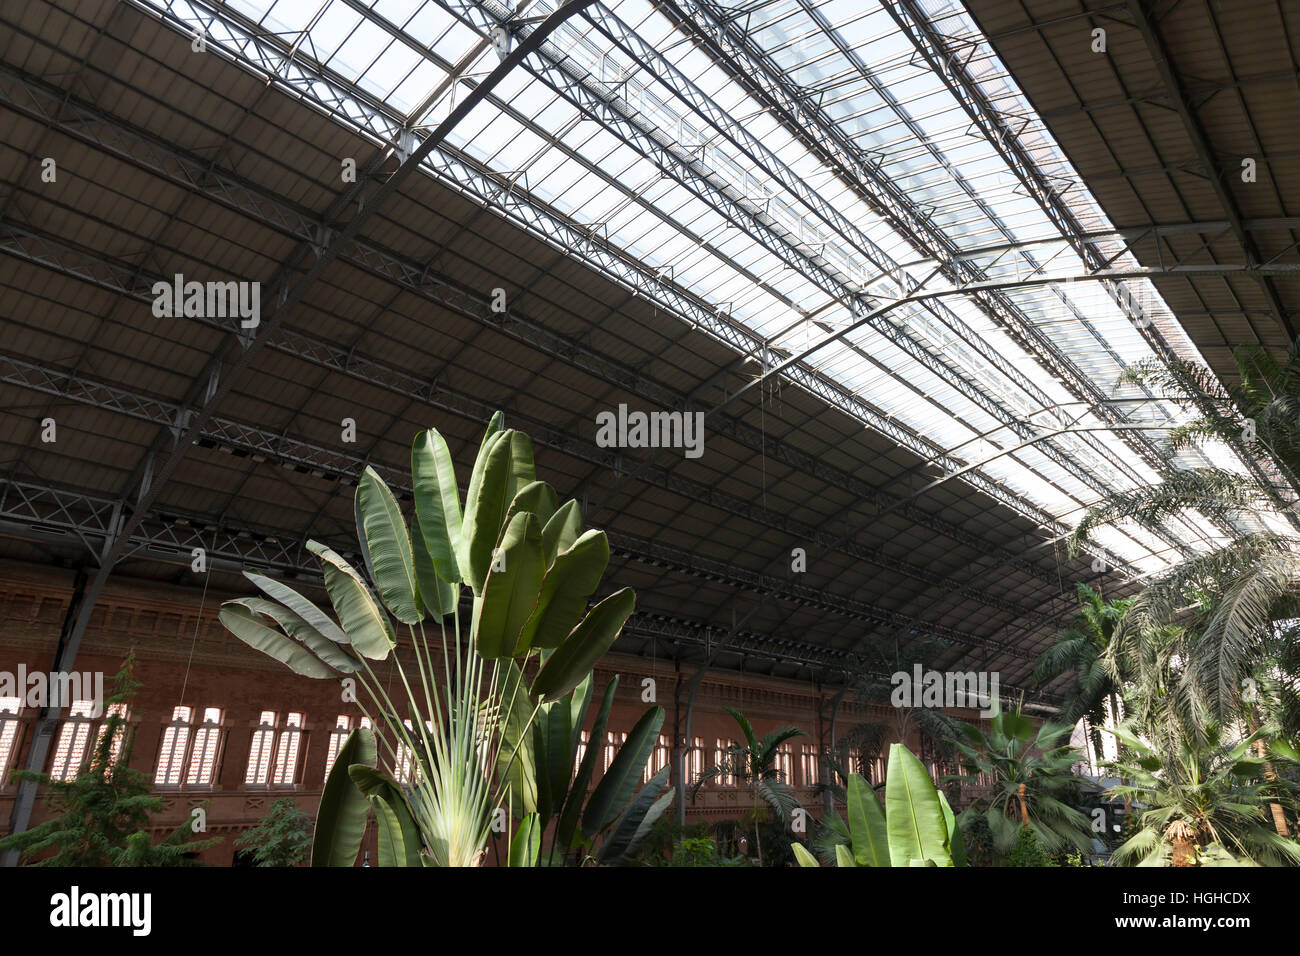 Madrid, Spain: Tropical garden in the plaza of the Madrid Atocha Railway Station. Stock Photo